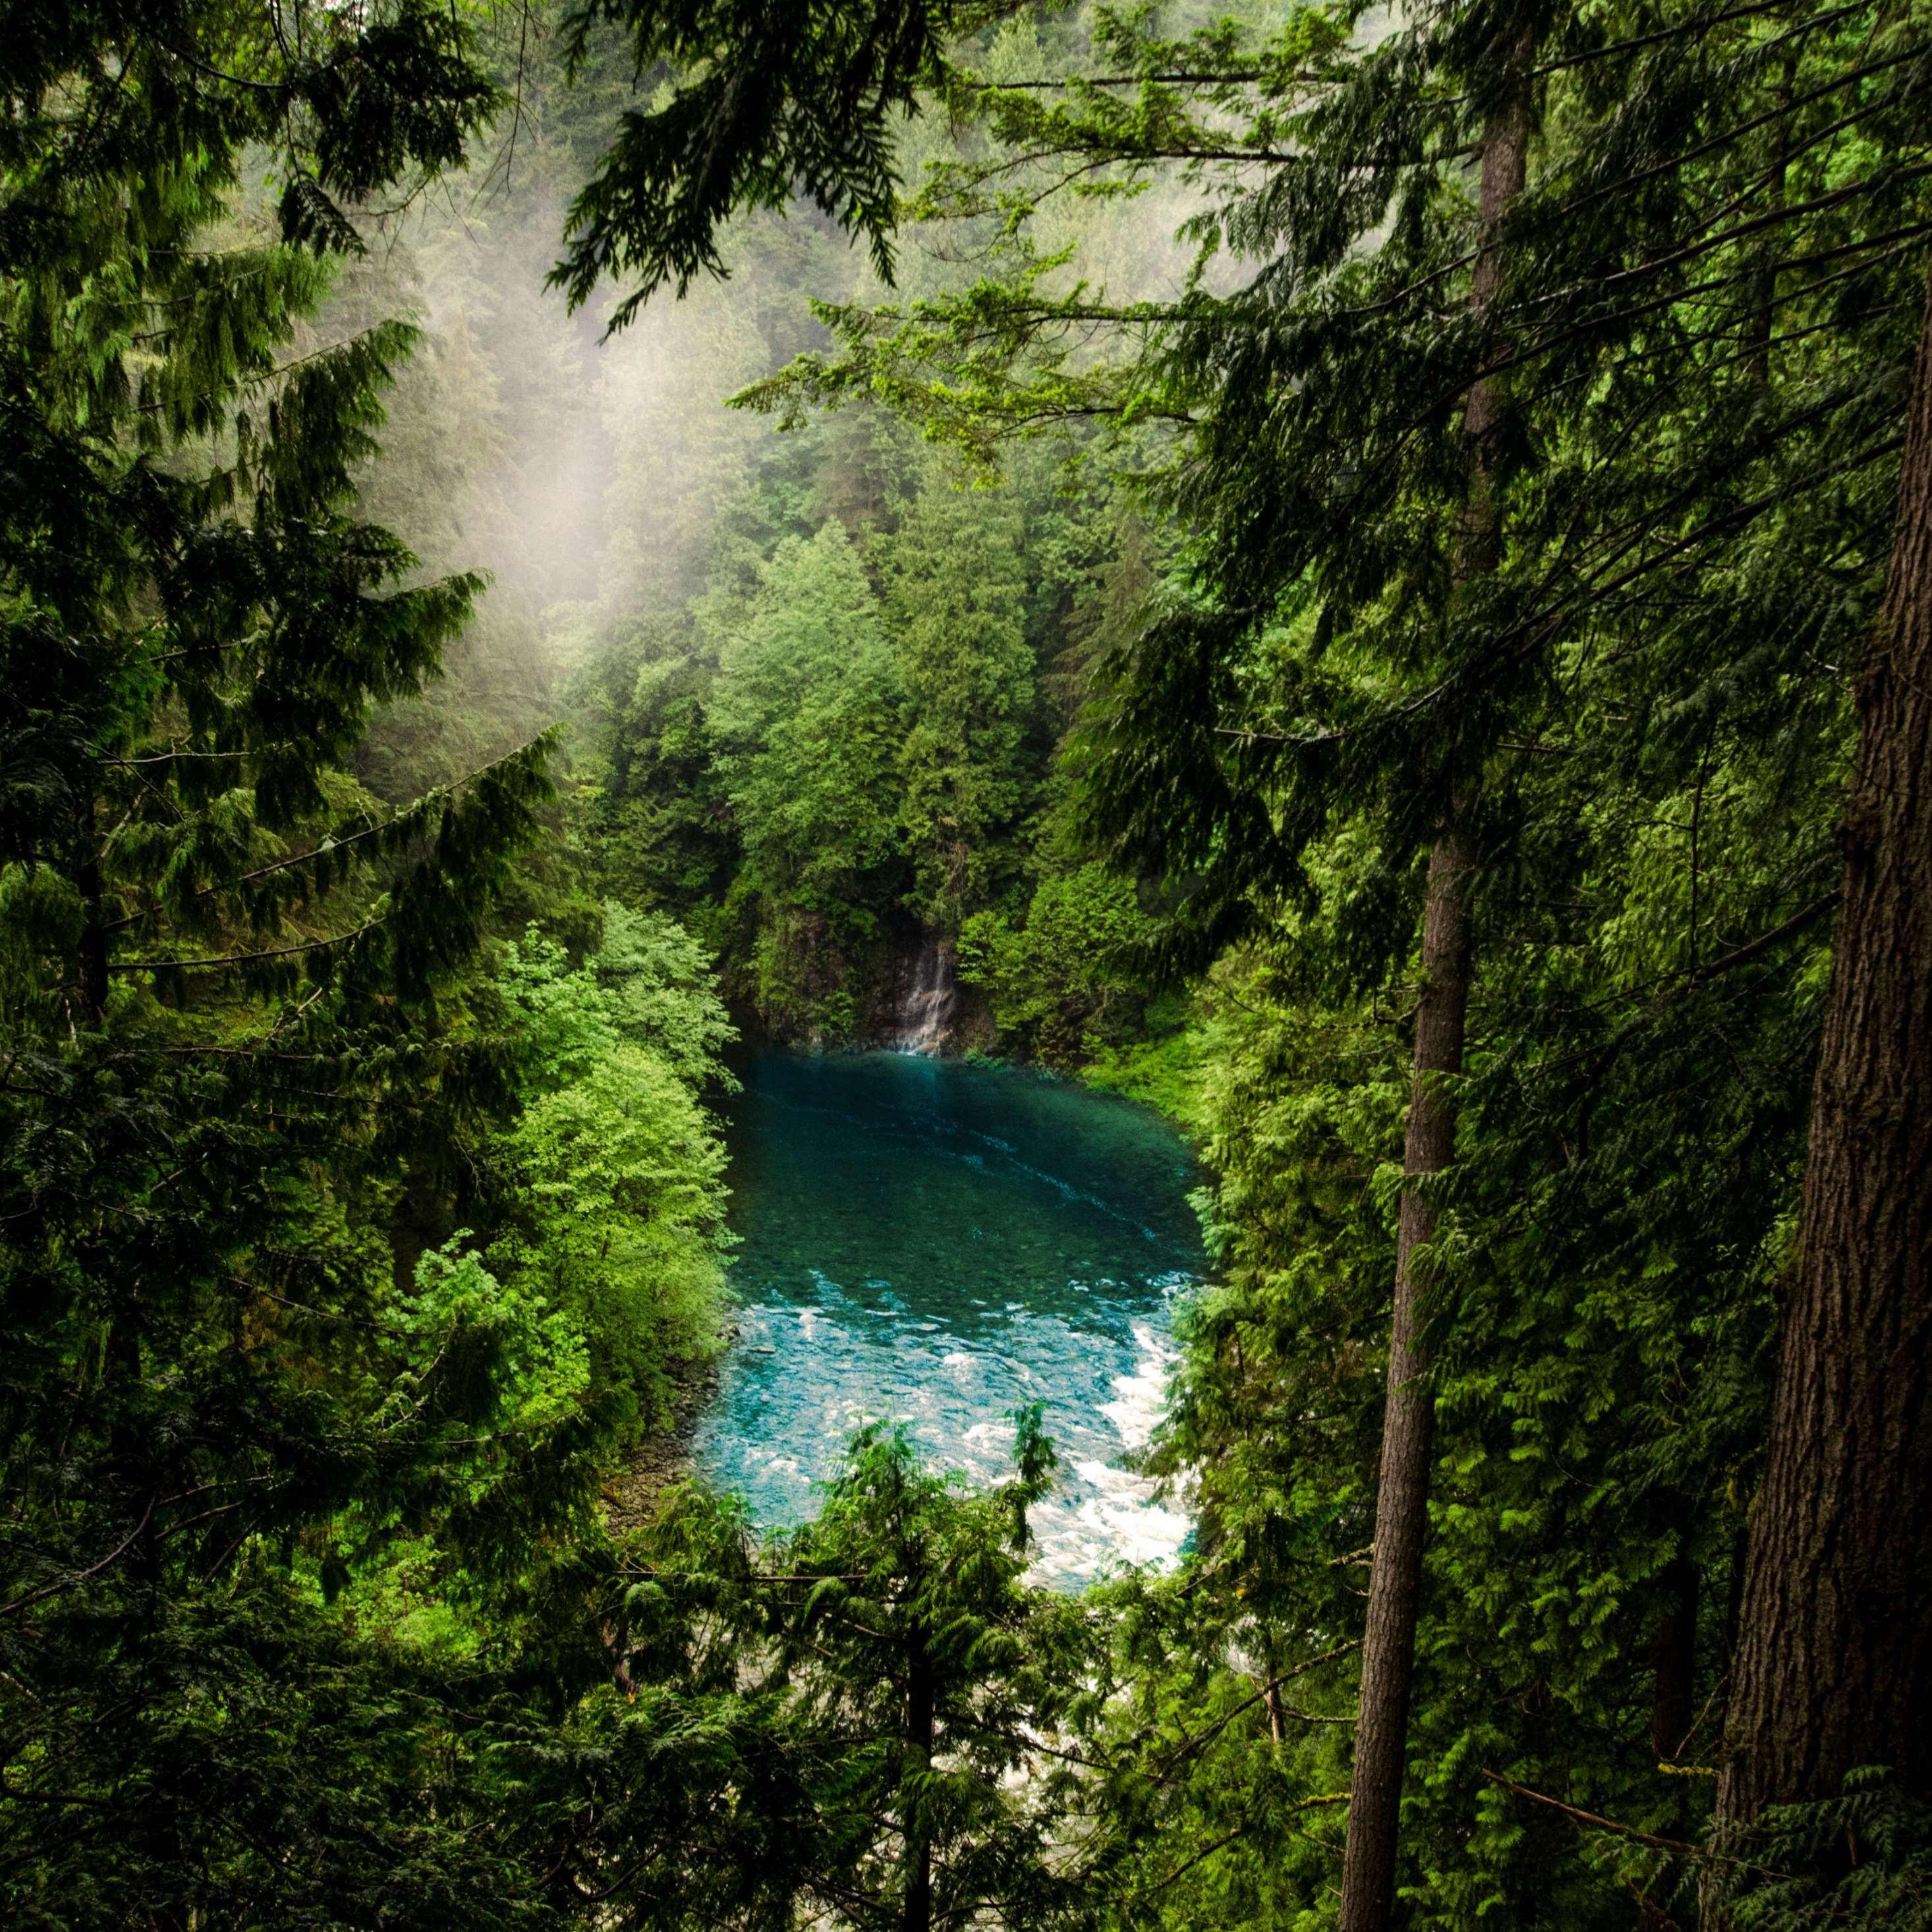 Download wallpaper 2932x2932 forest, lake, green trees, nature, ipad pro  retina, 2932x2932 hd background, 3579